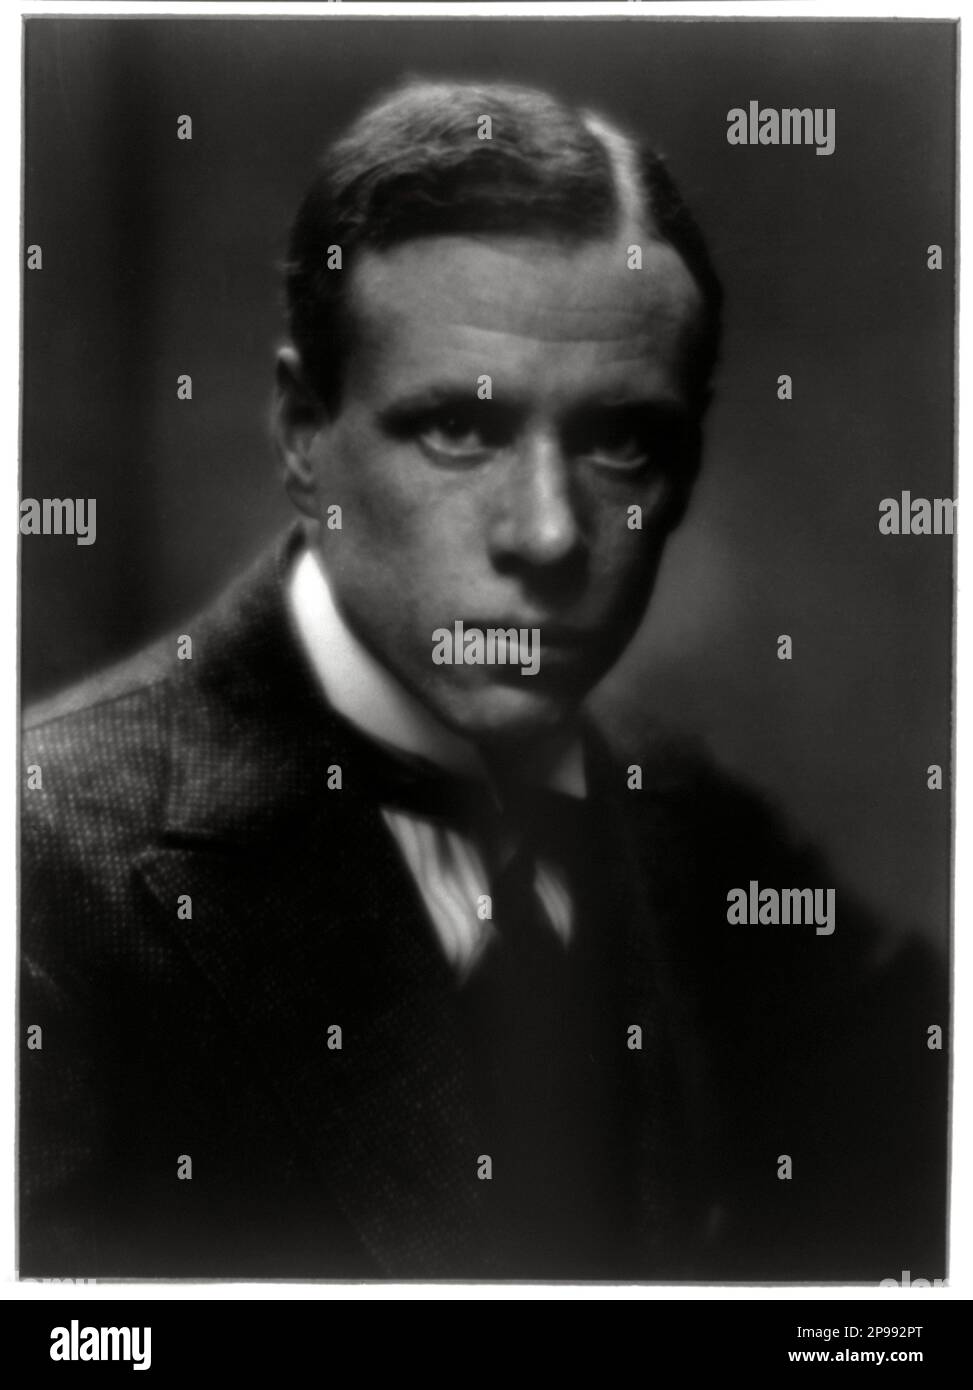 1914 : The american novelist , short-story writer, and playwright SINCLAIR LEWIS ( 1885 - 1951 ). Photo by Arnold Genthe . In 1930 he became the first American to be awarded the Nobel Prize in Literature  - SCRITTORE - LETTERATURA - LITERATURE - letterato - TEATRO - THEATRE - THEATER - portrait - ritratto - collar - colletto  ----   Archivio GBB Stock Photo